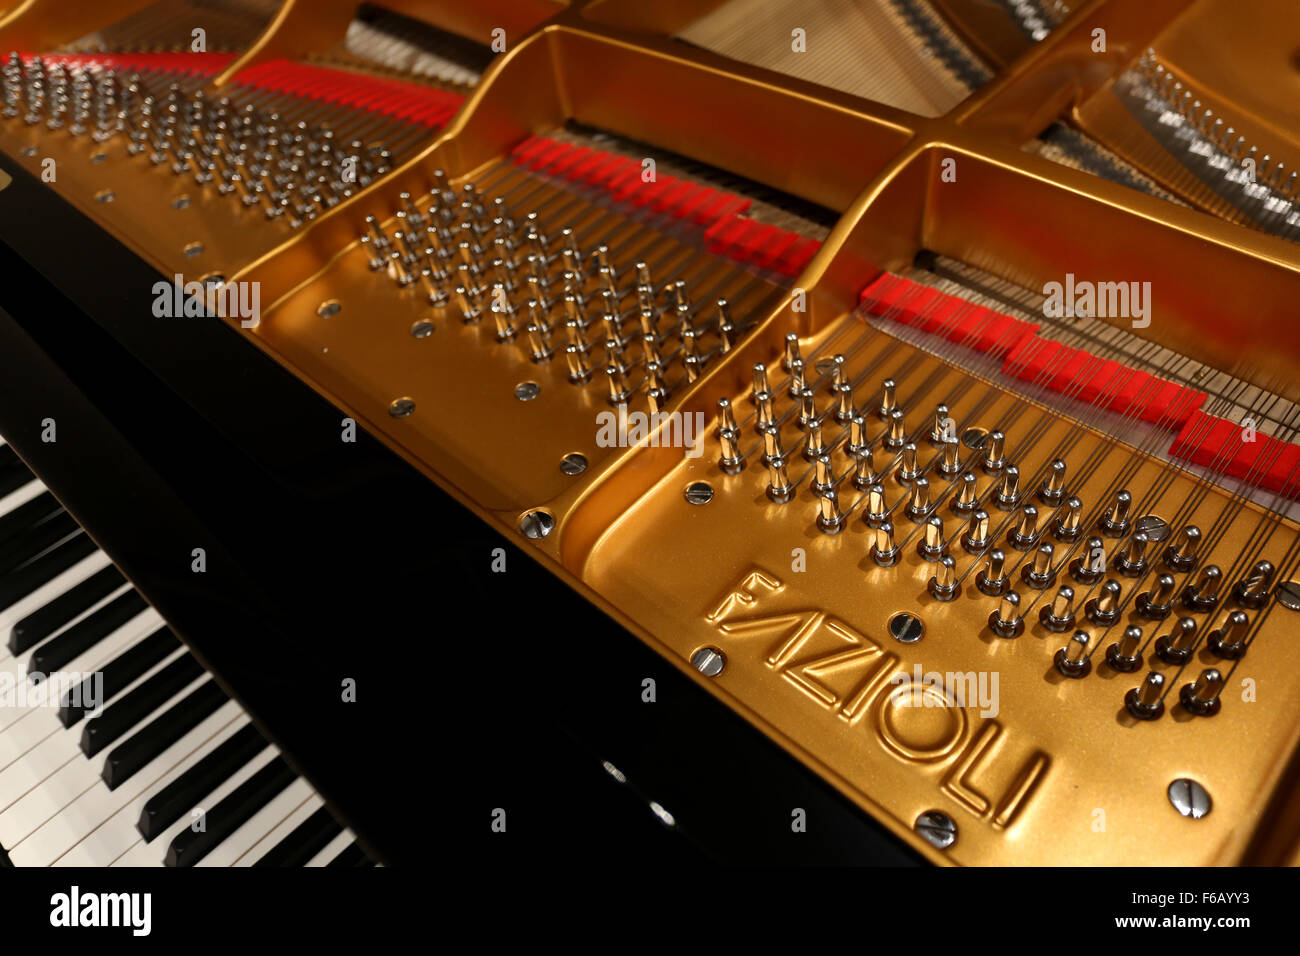 Close up photograph of an expensive limited edition Fazioli piano, made in Sacile, Italy. Stock Photo